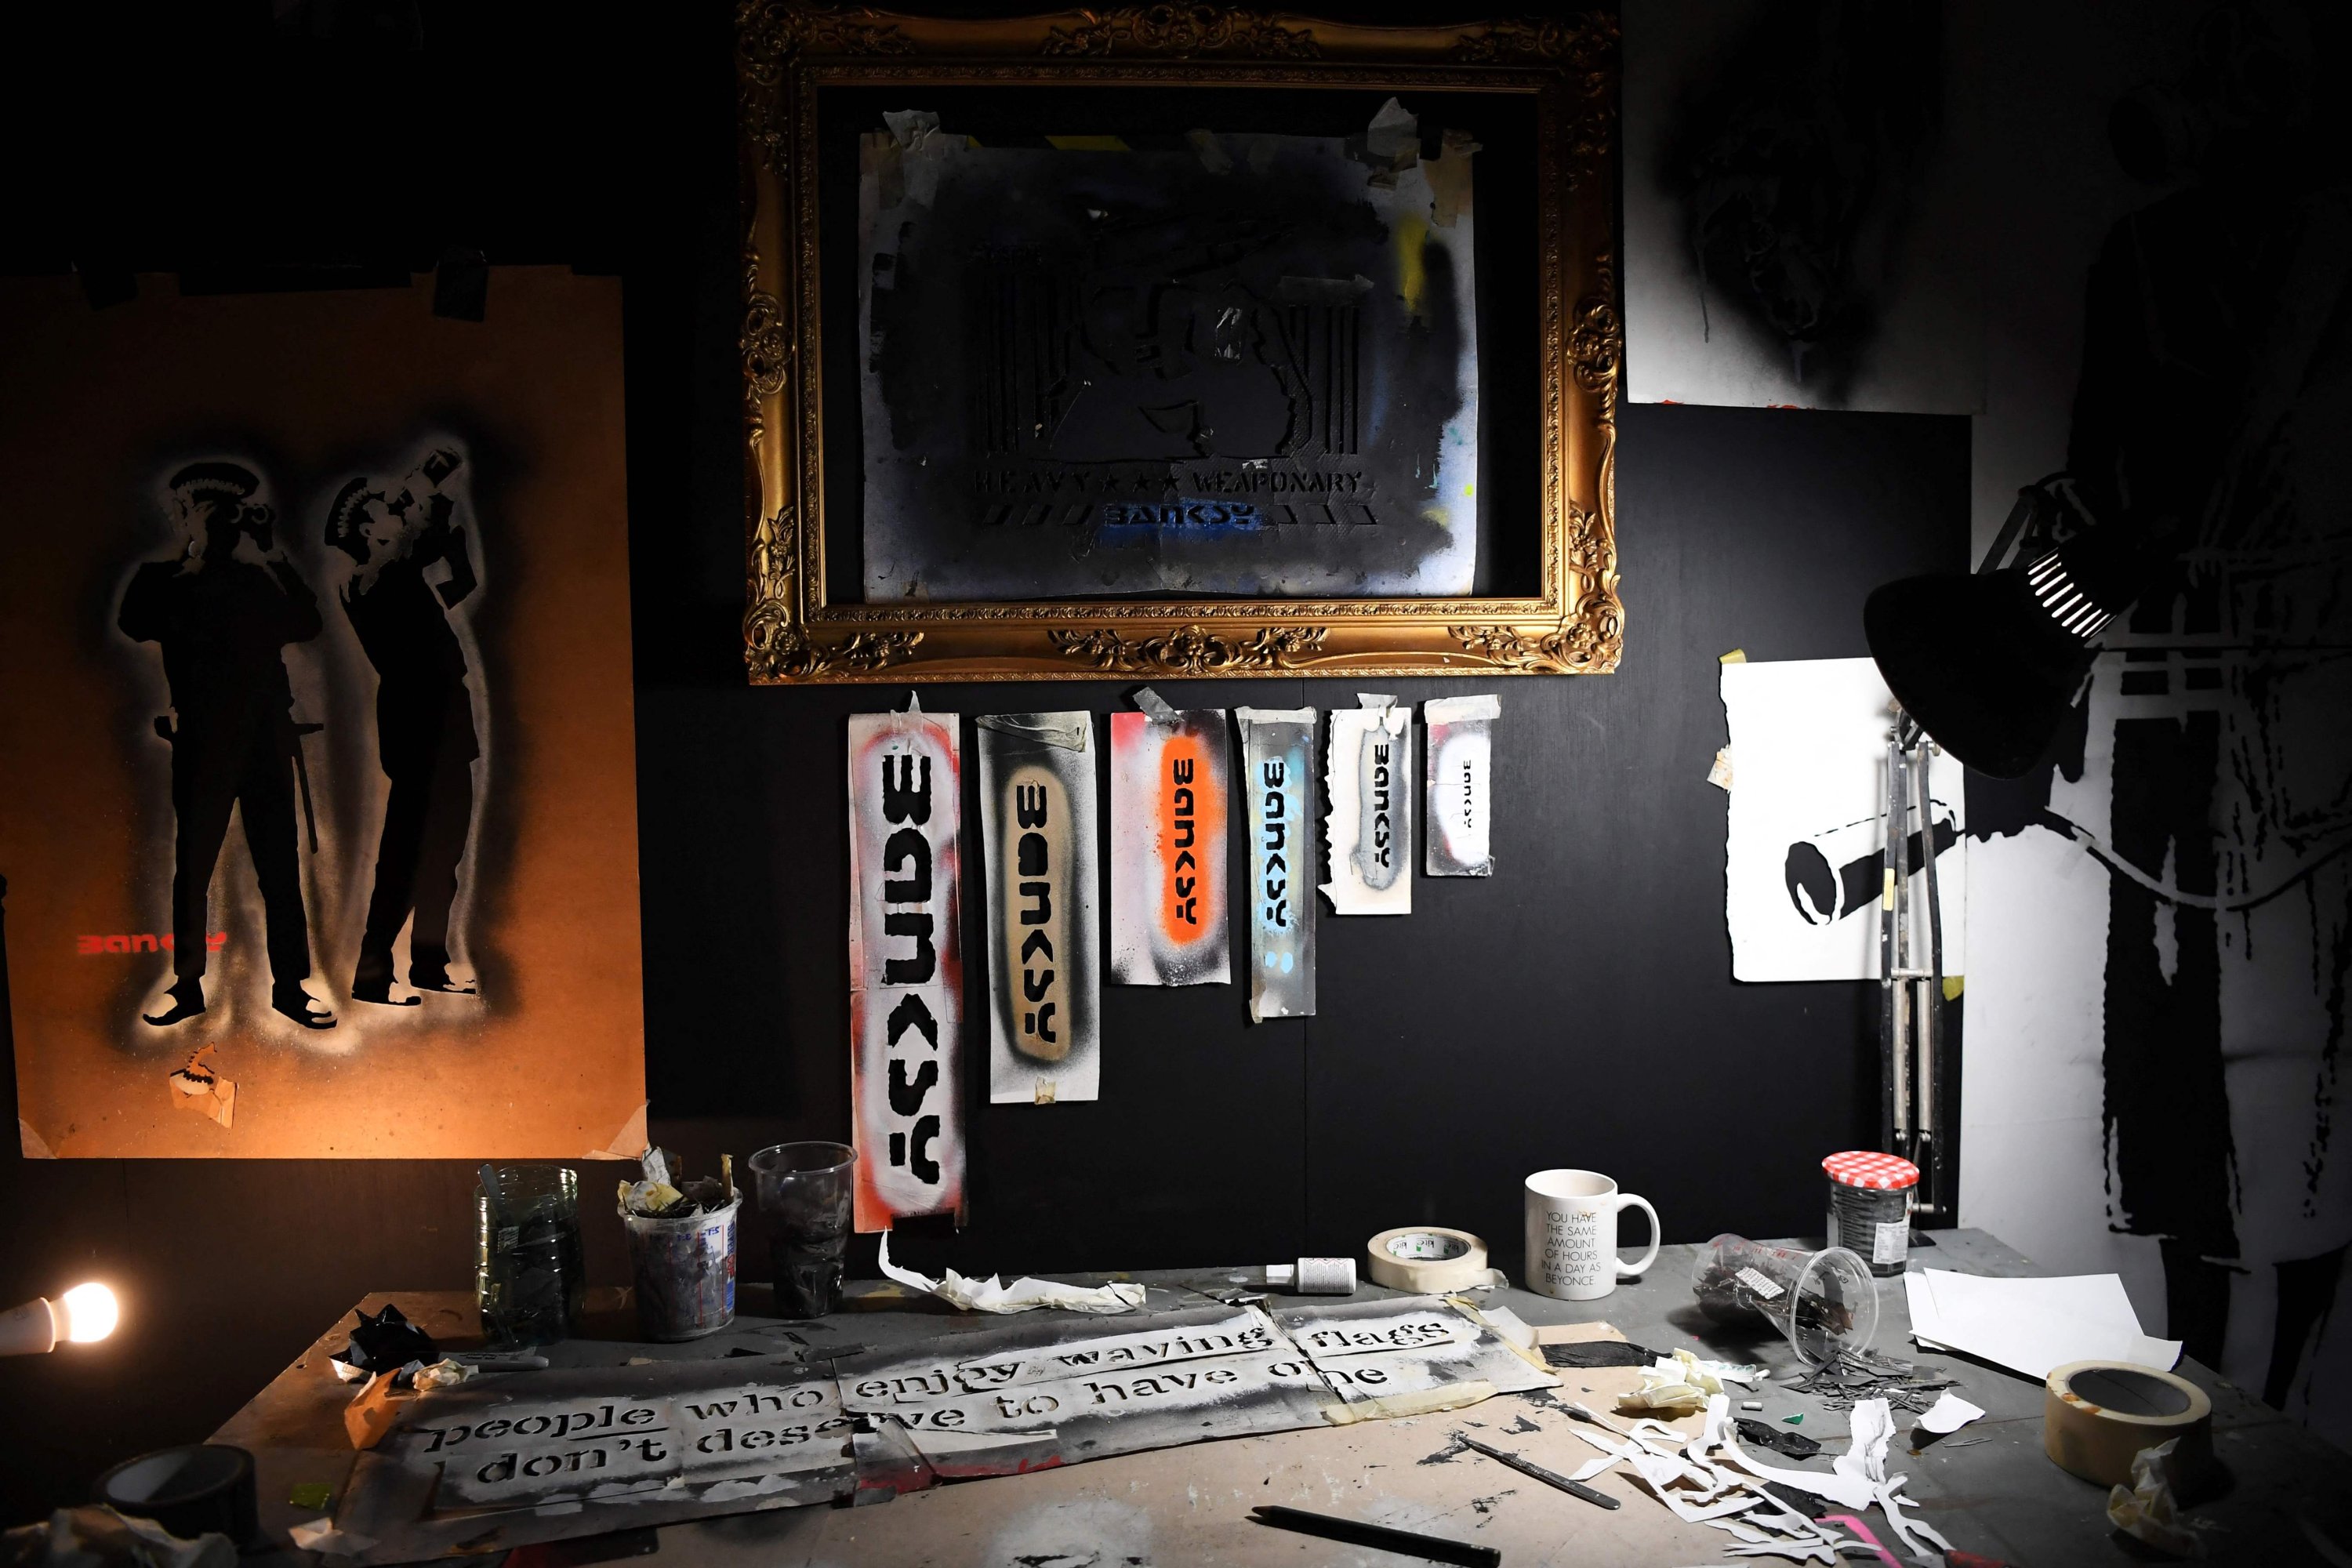 The photograph shows a general view of some of the art pieces displayed during the British artist Banksy solo show 